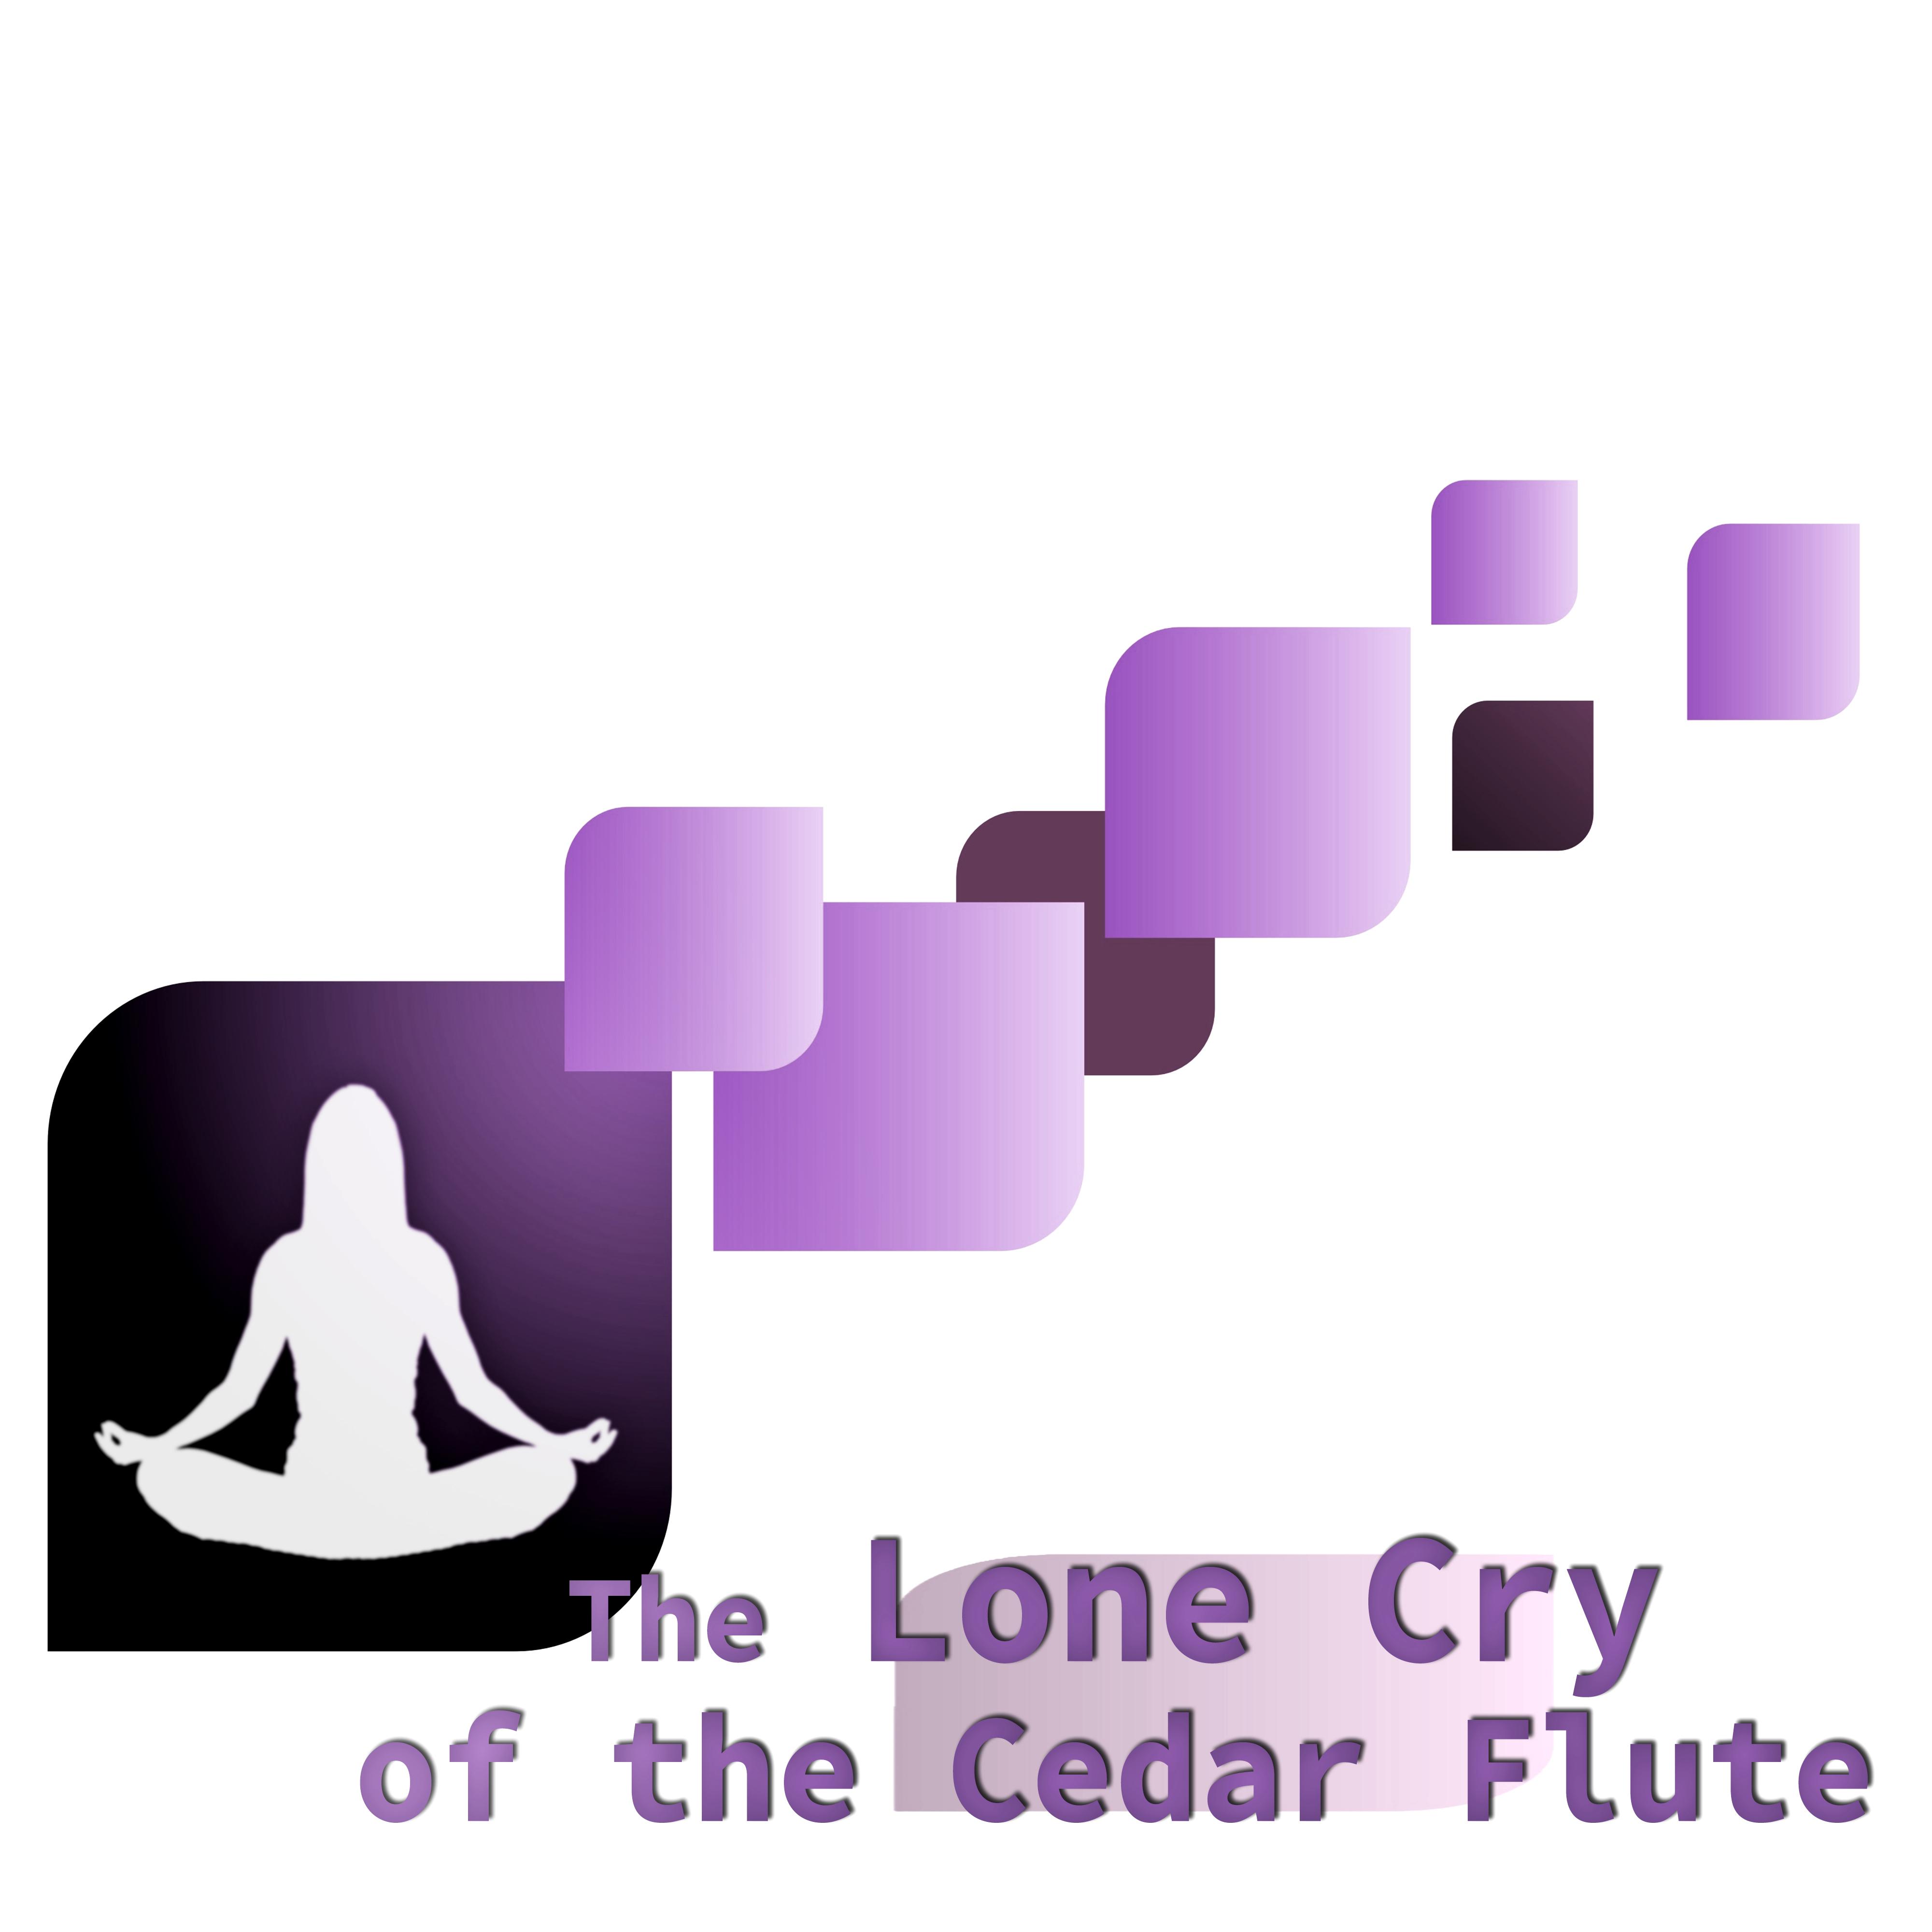 The Lone Cry of the Cedar Flute – Music Therapy for Massage, Nature of Sounds for Reiki, Yoga, Sleep